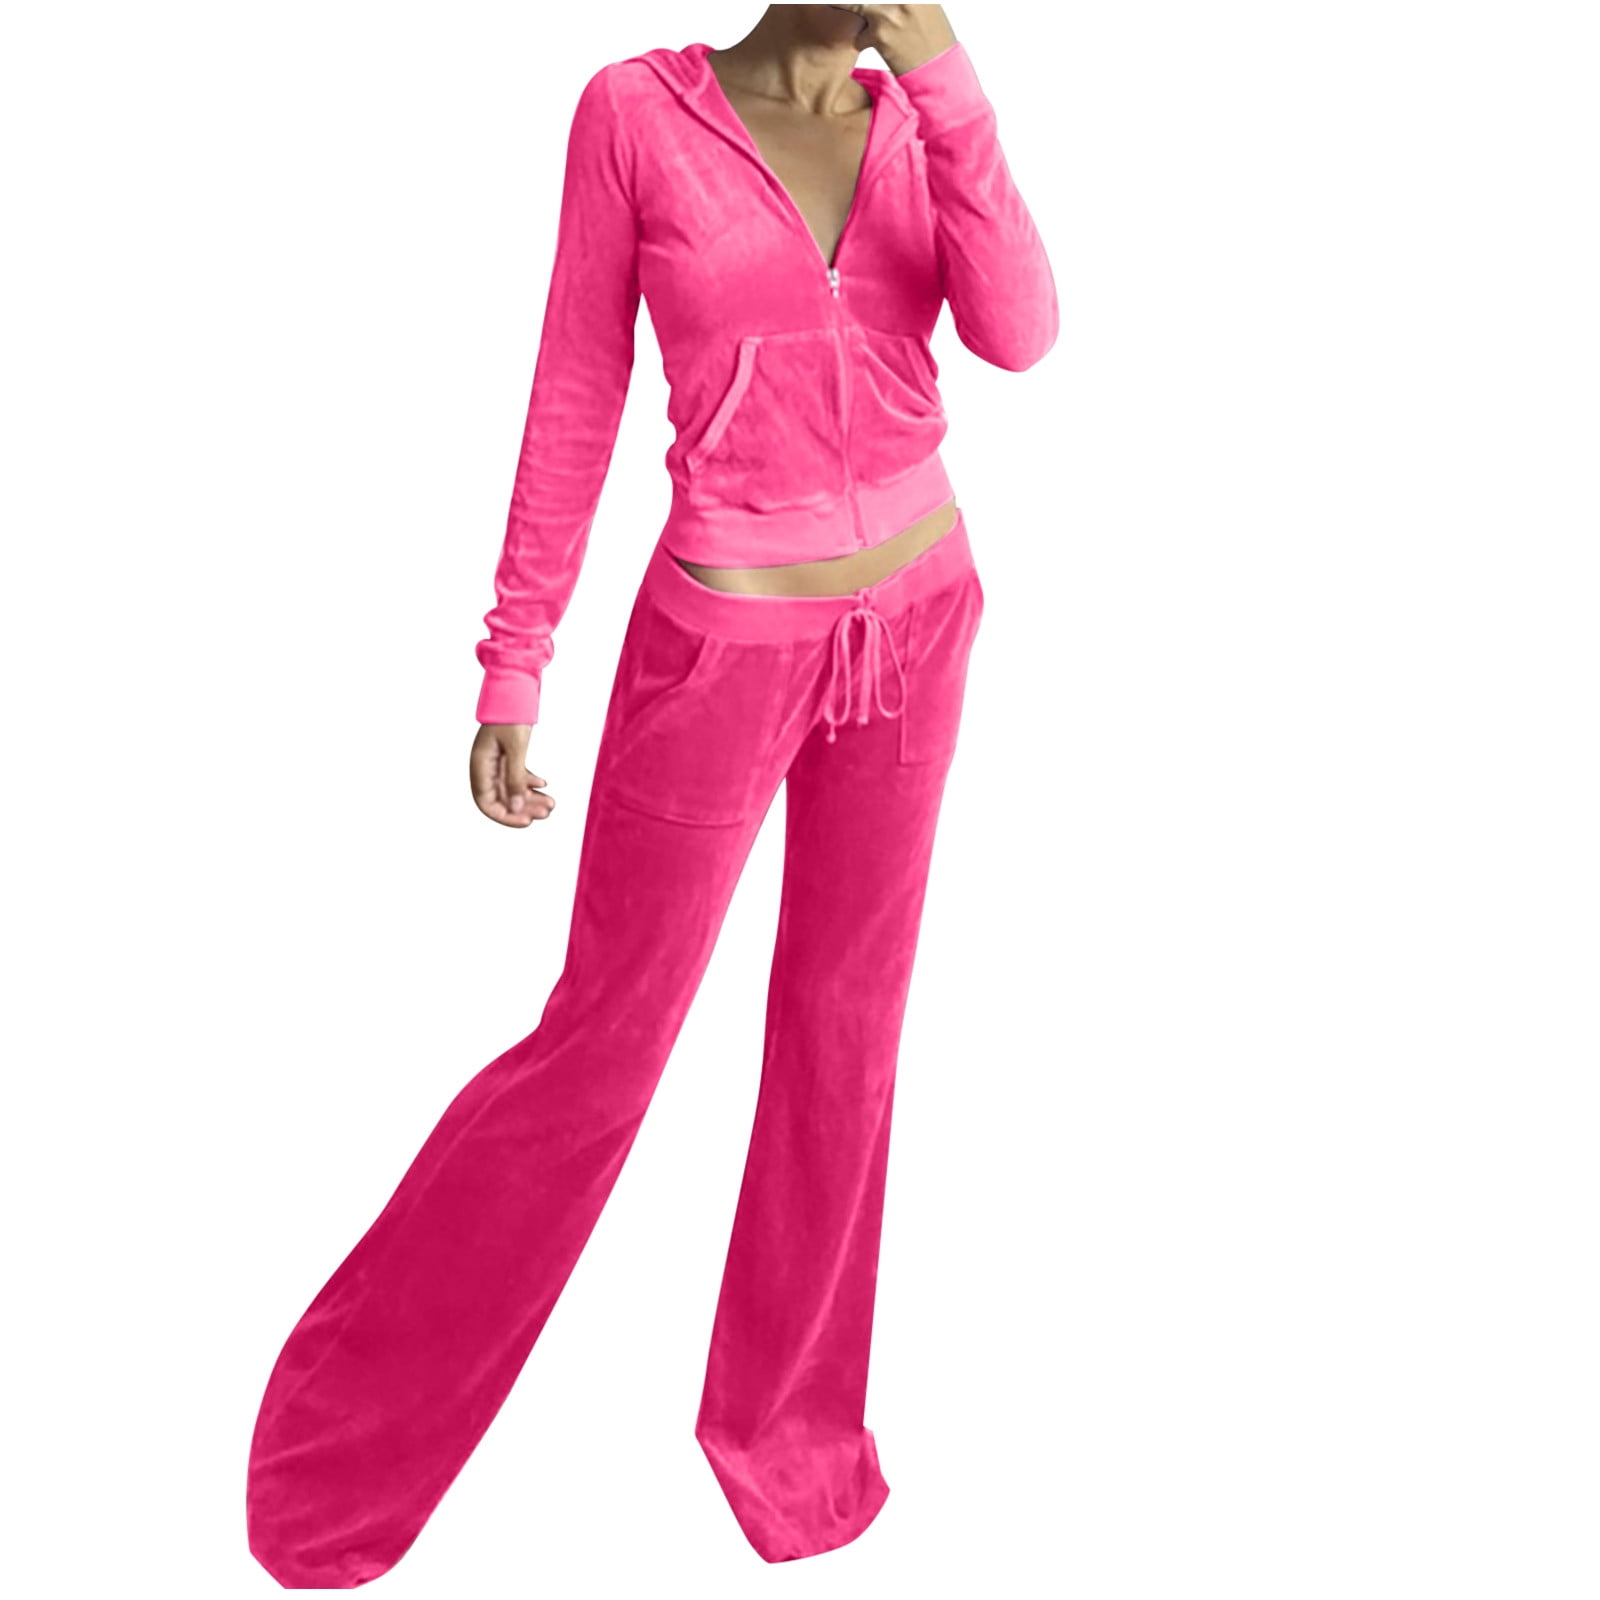 Velvet Tracksuits Womens 2 Piece Comfy Jacket and Pant Sets Full